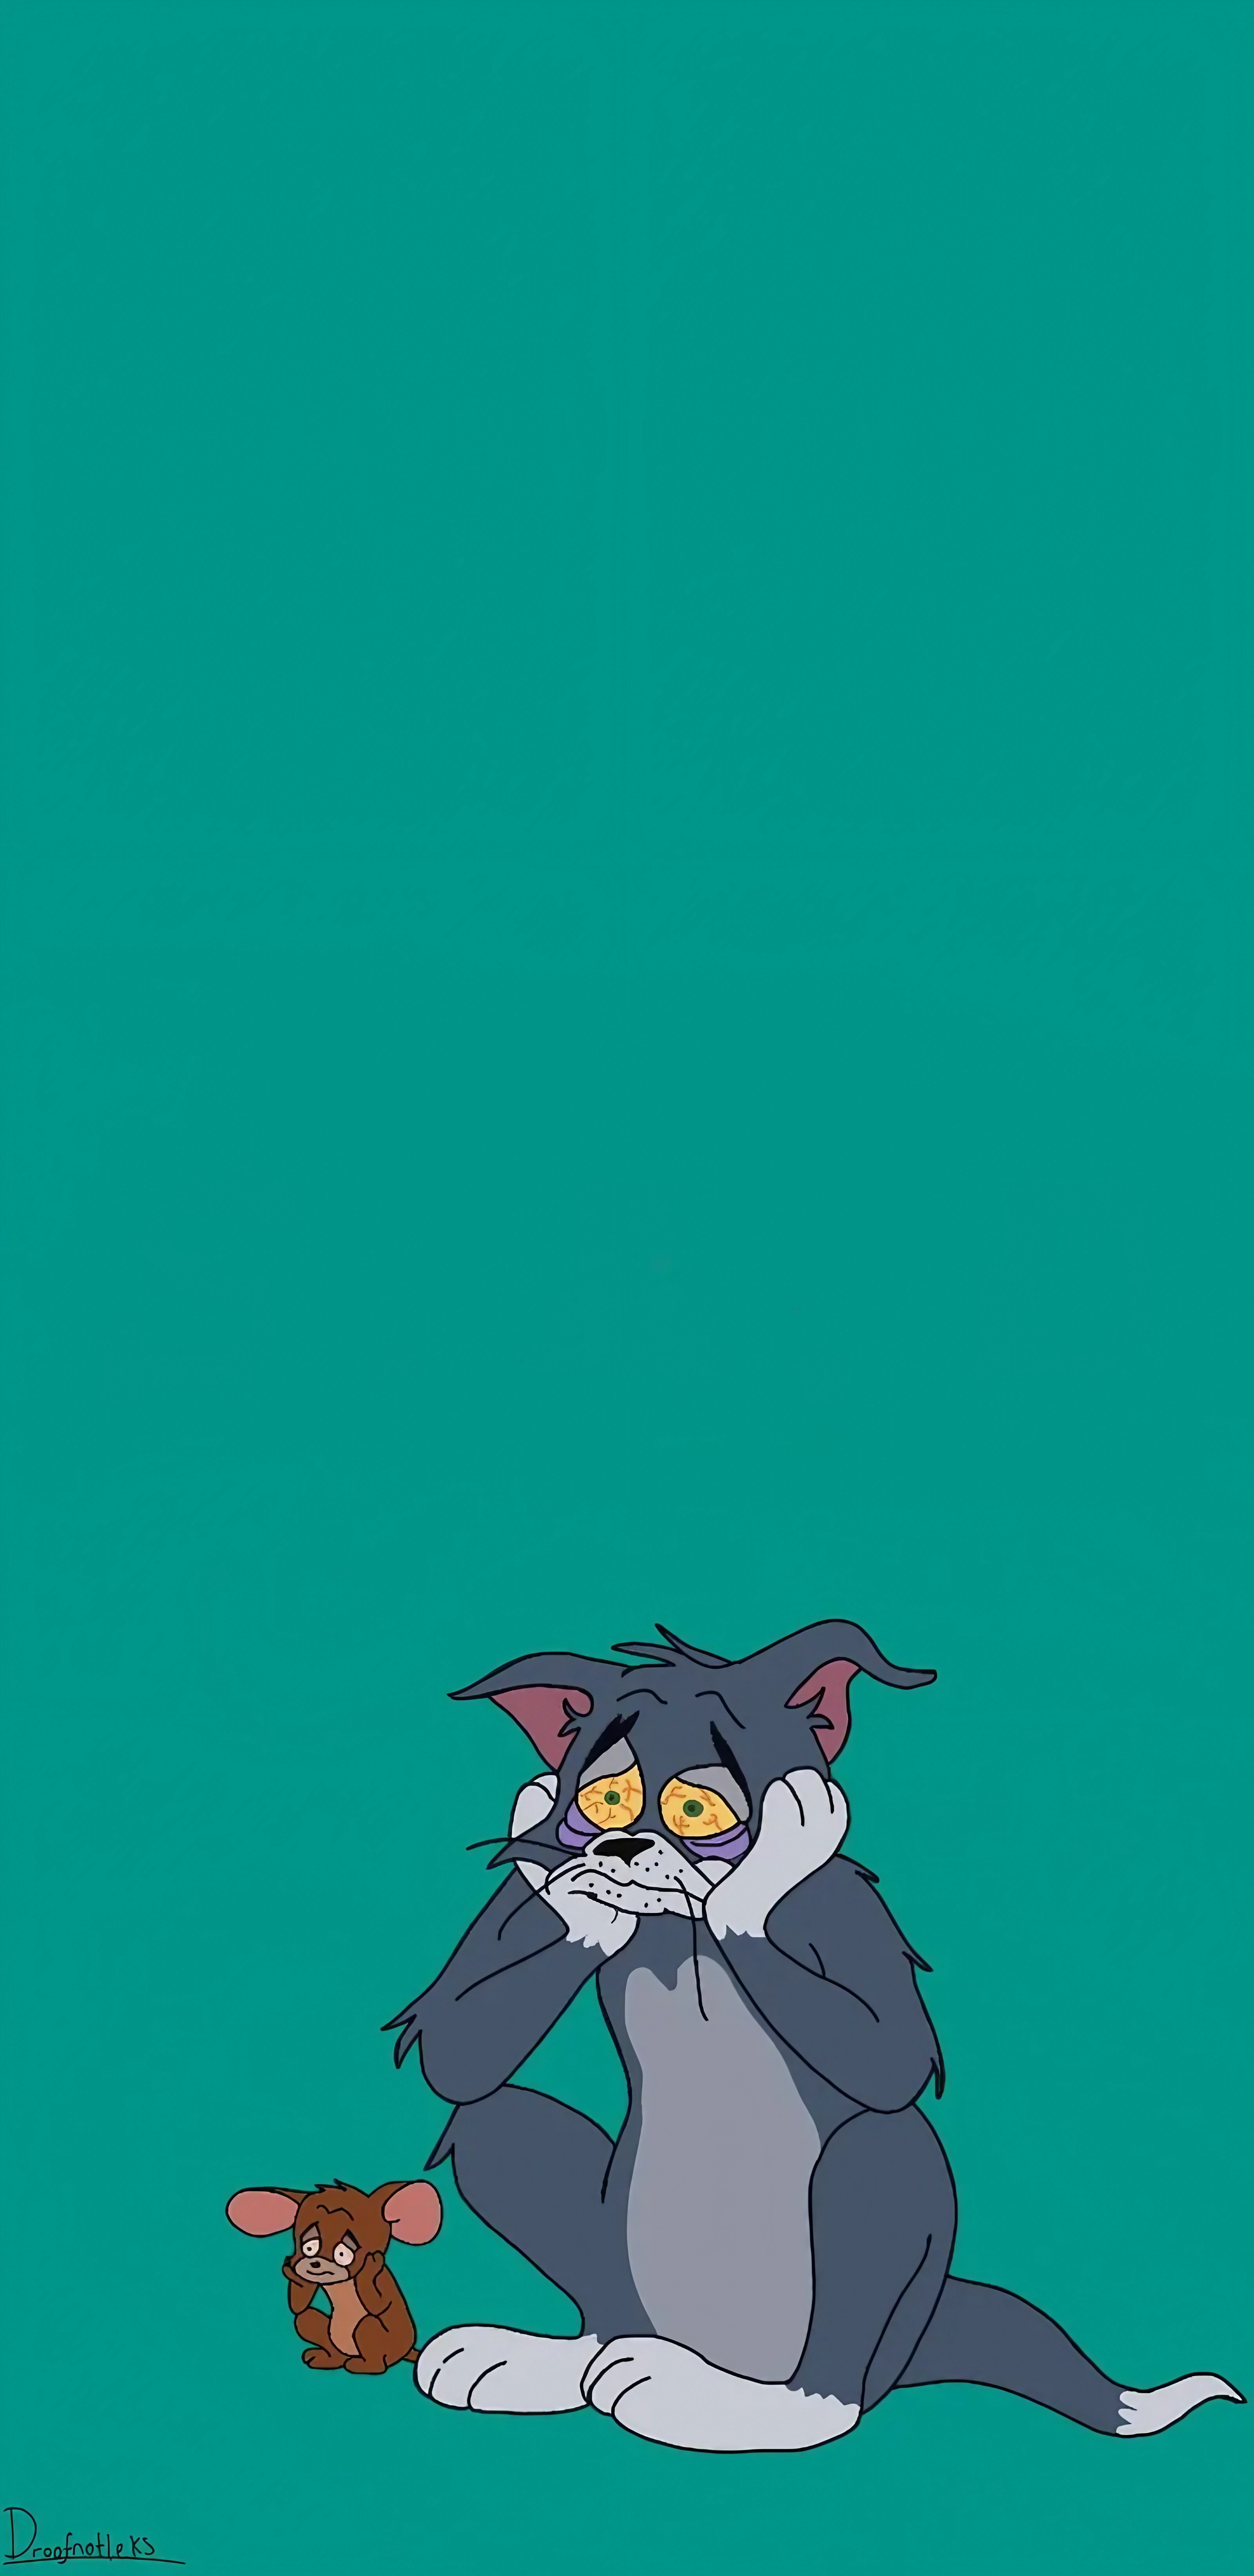 Tom and Jerry cartoon Wallpaper Download